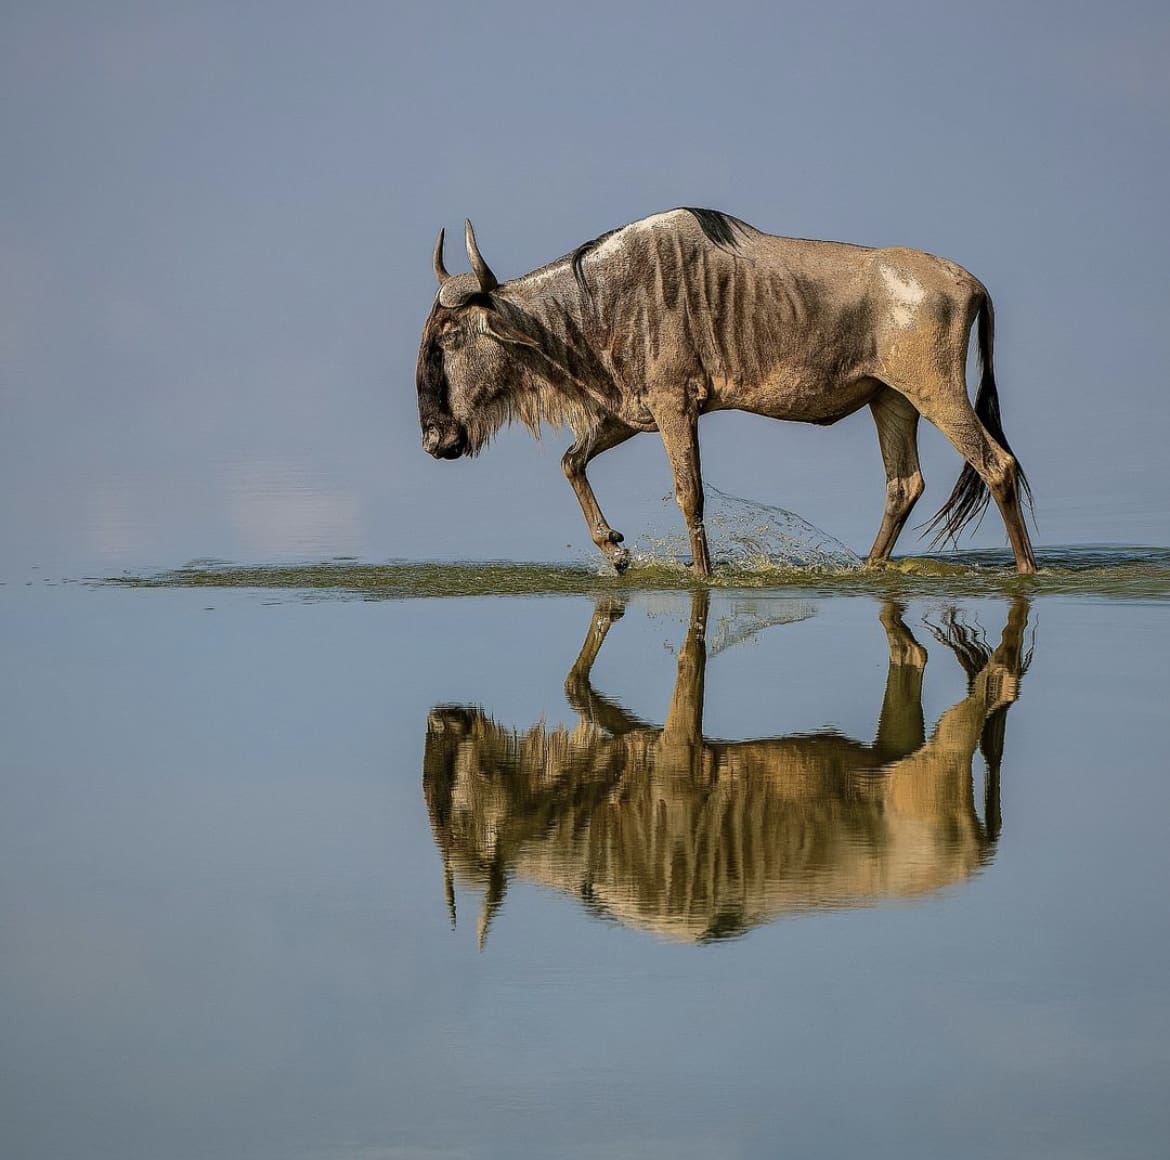 Wildebeest reflection as it walks across a shallow lake